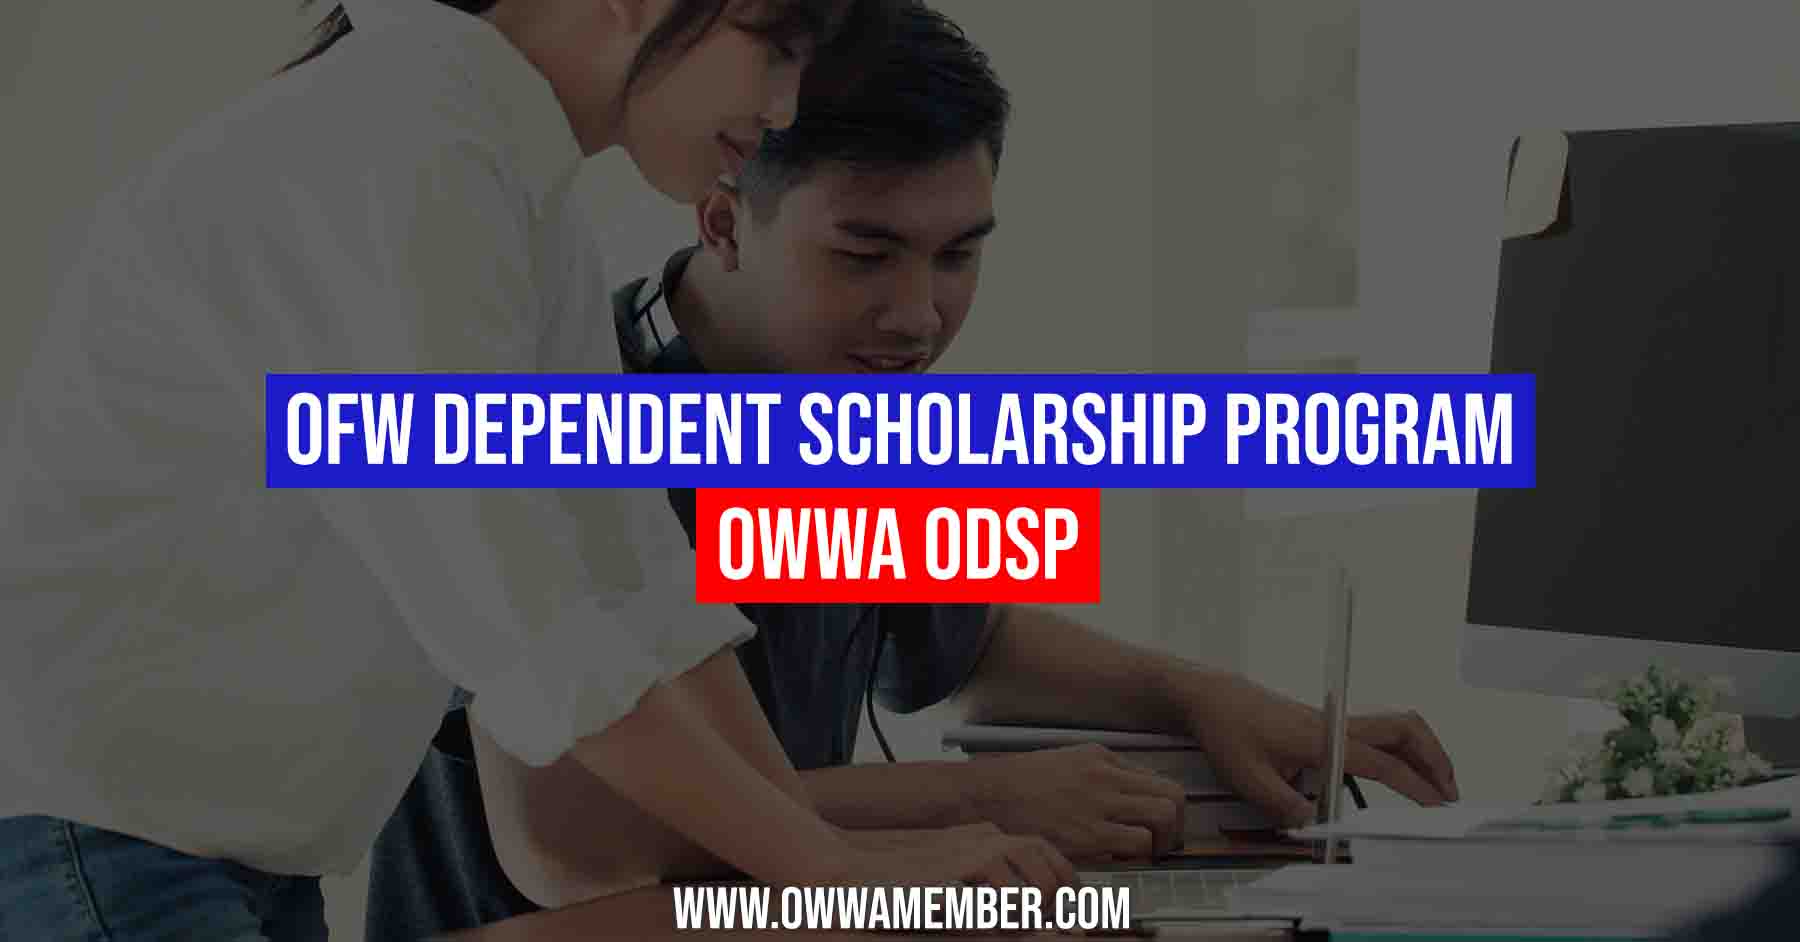 how to apply ofw dependent scholarship program ODSP